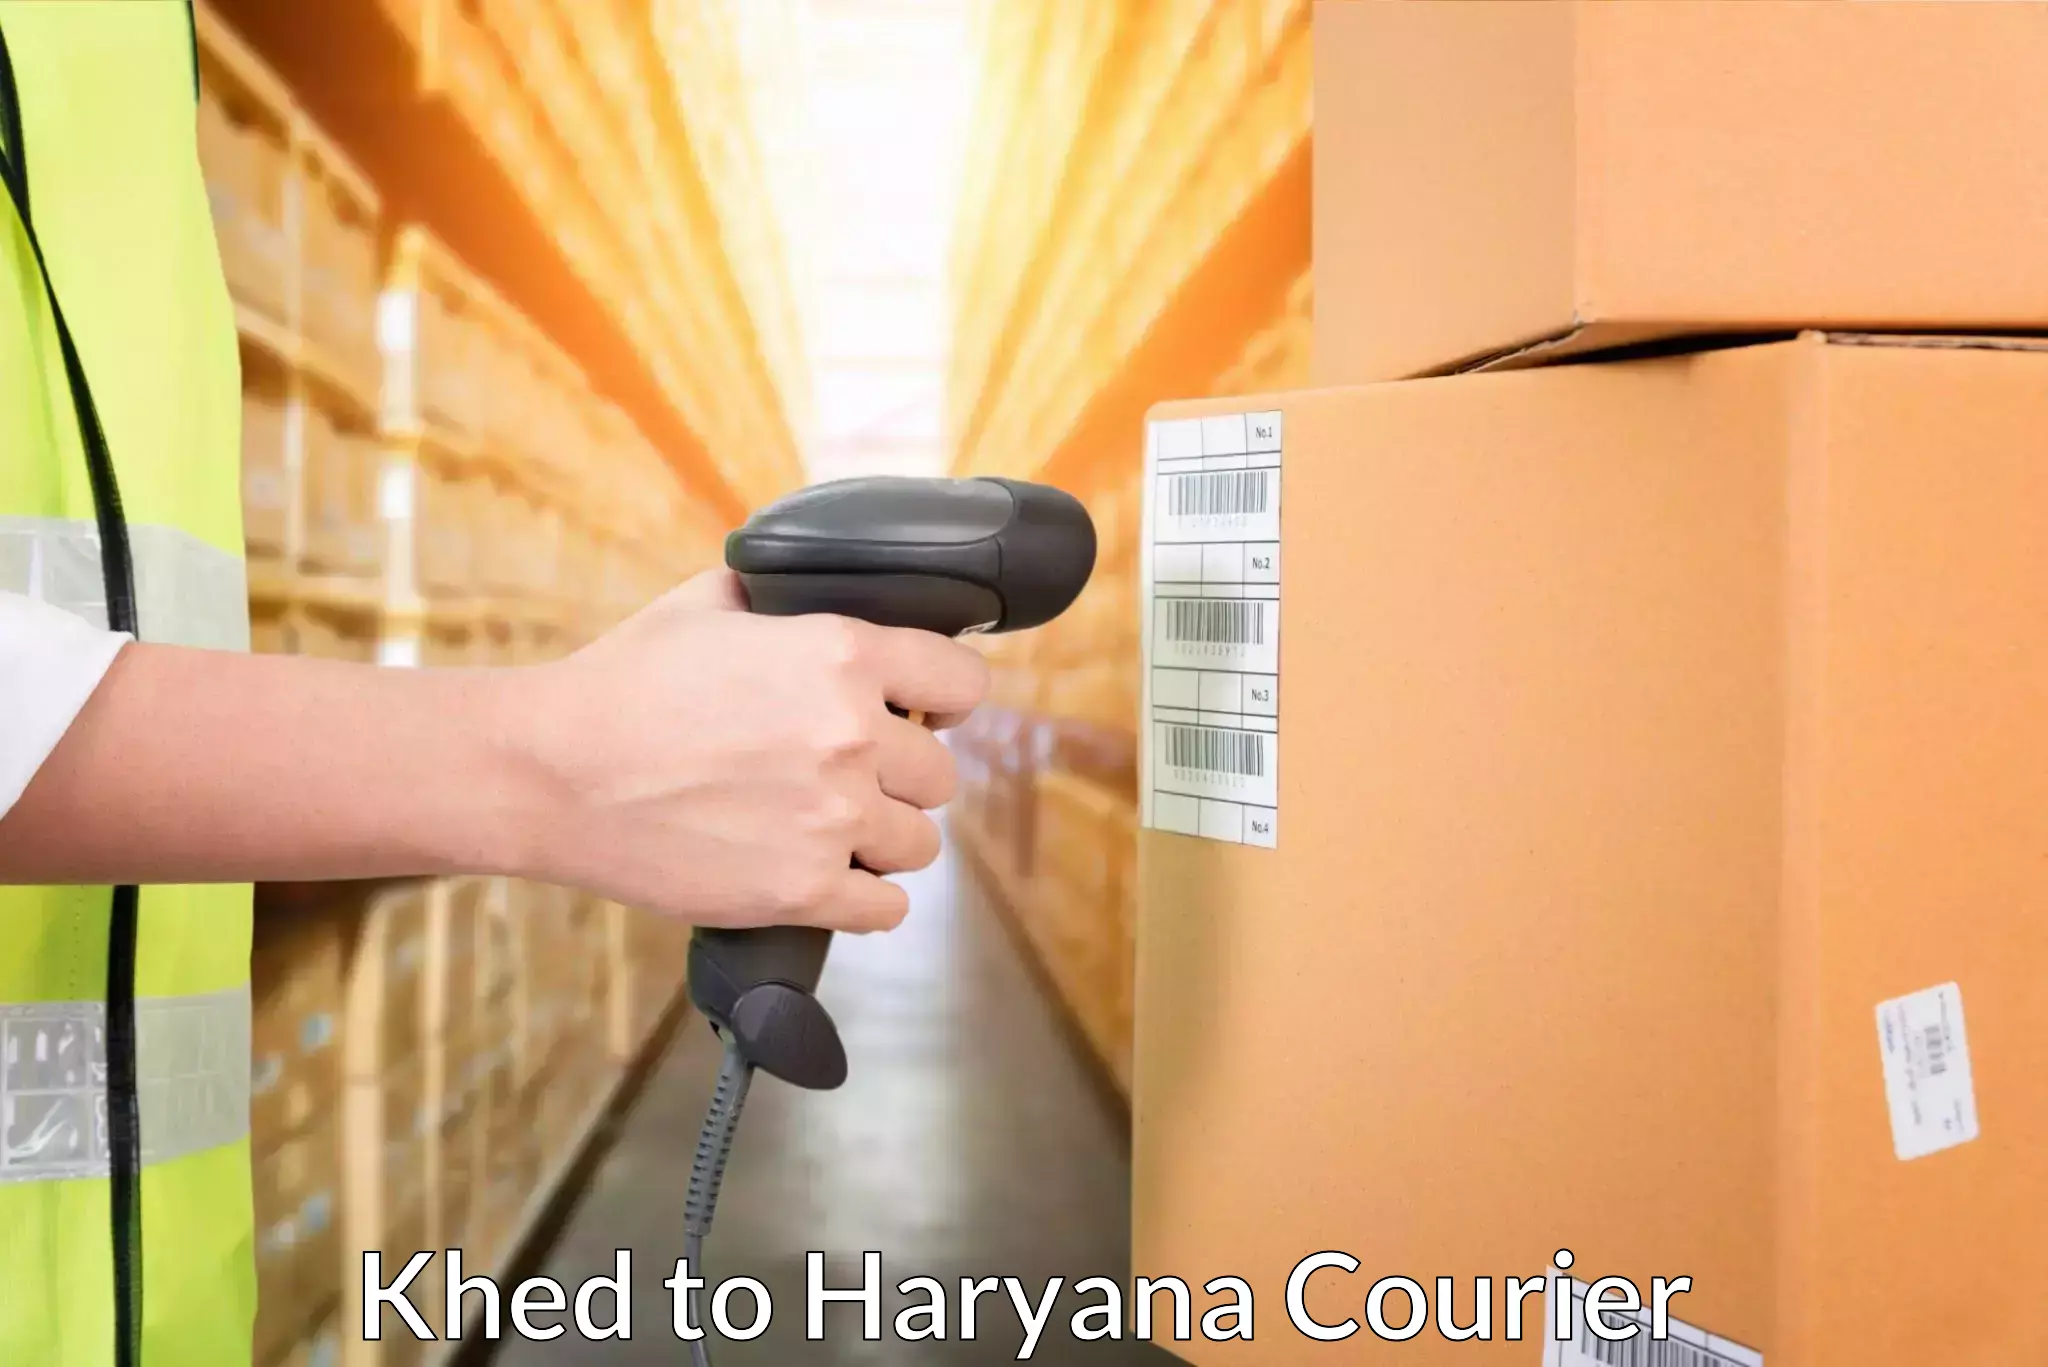 Package delivery network Khed to Kurukshetra